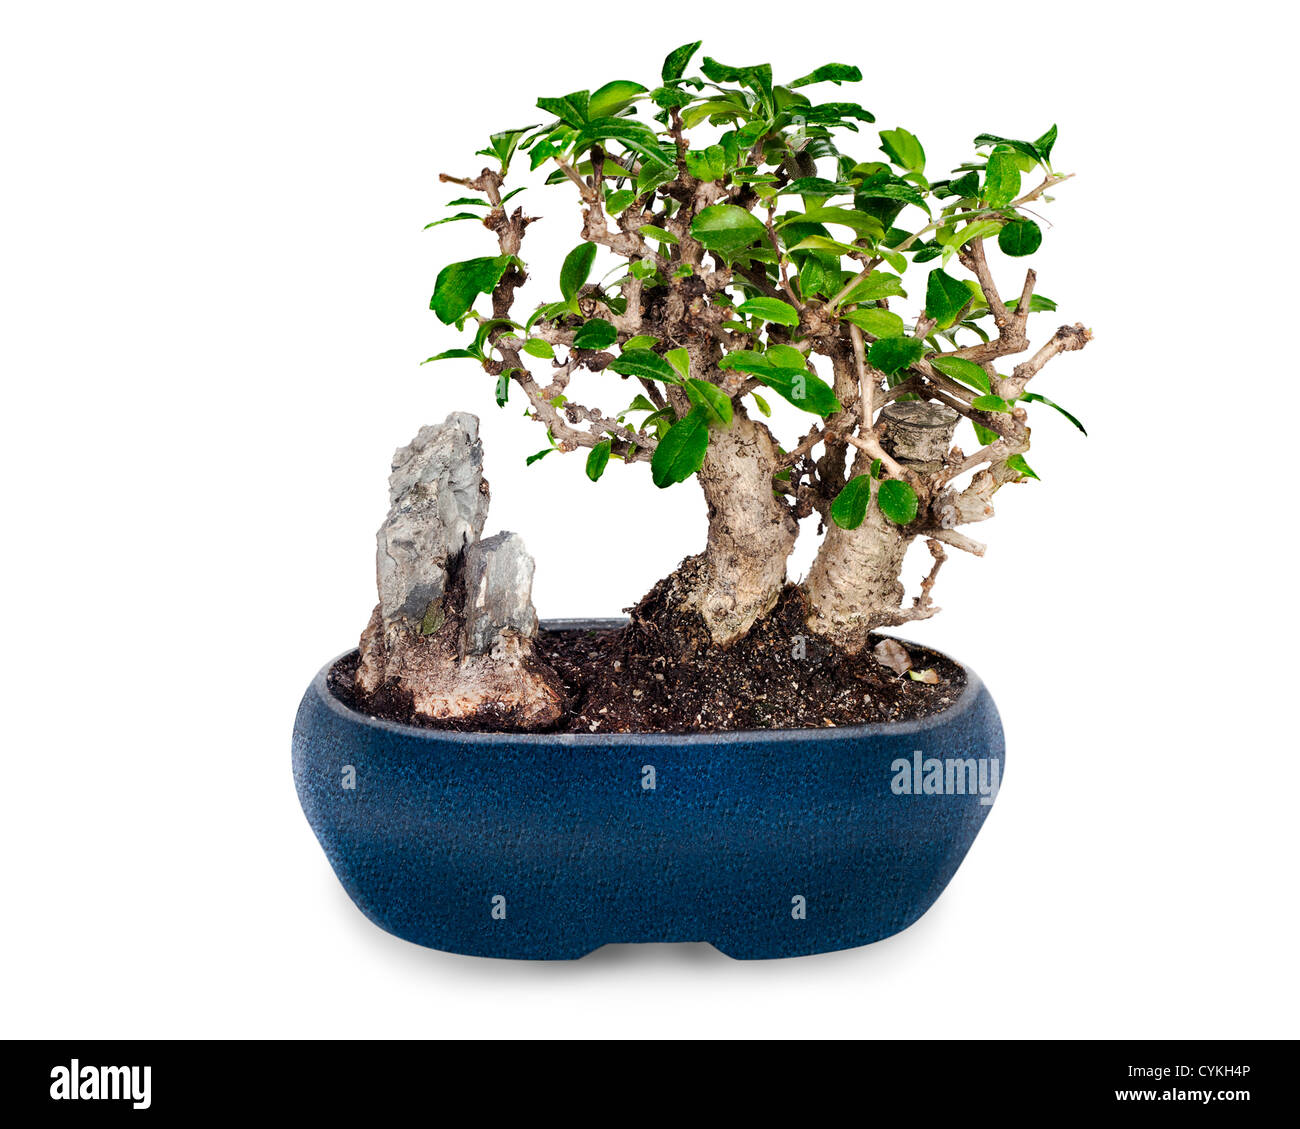 miniature bonsai tree and stone in blue pot isolated on white background Stock Photo